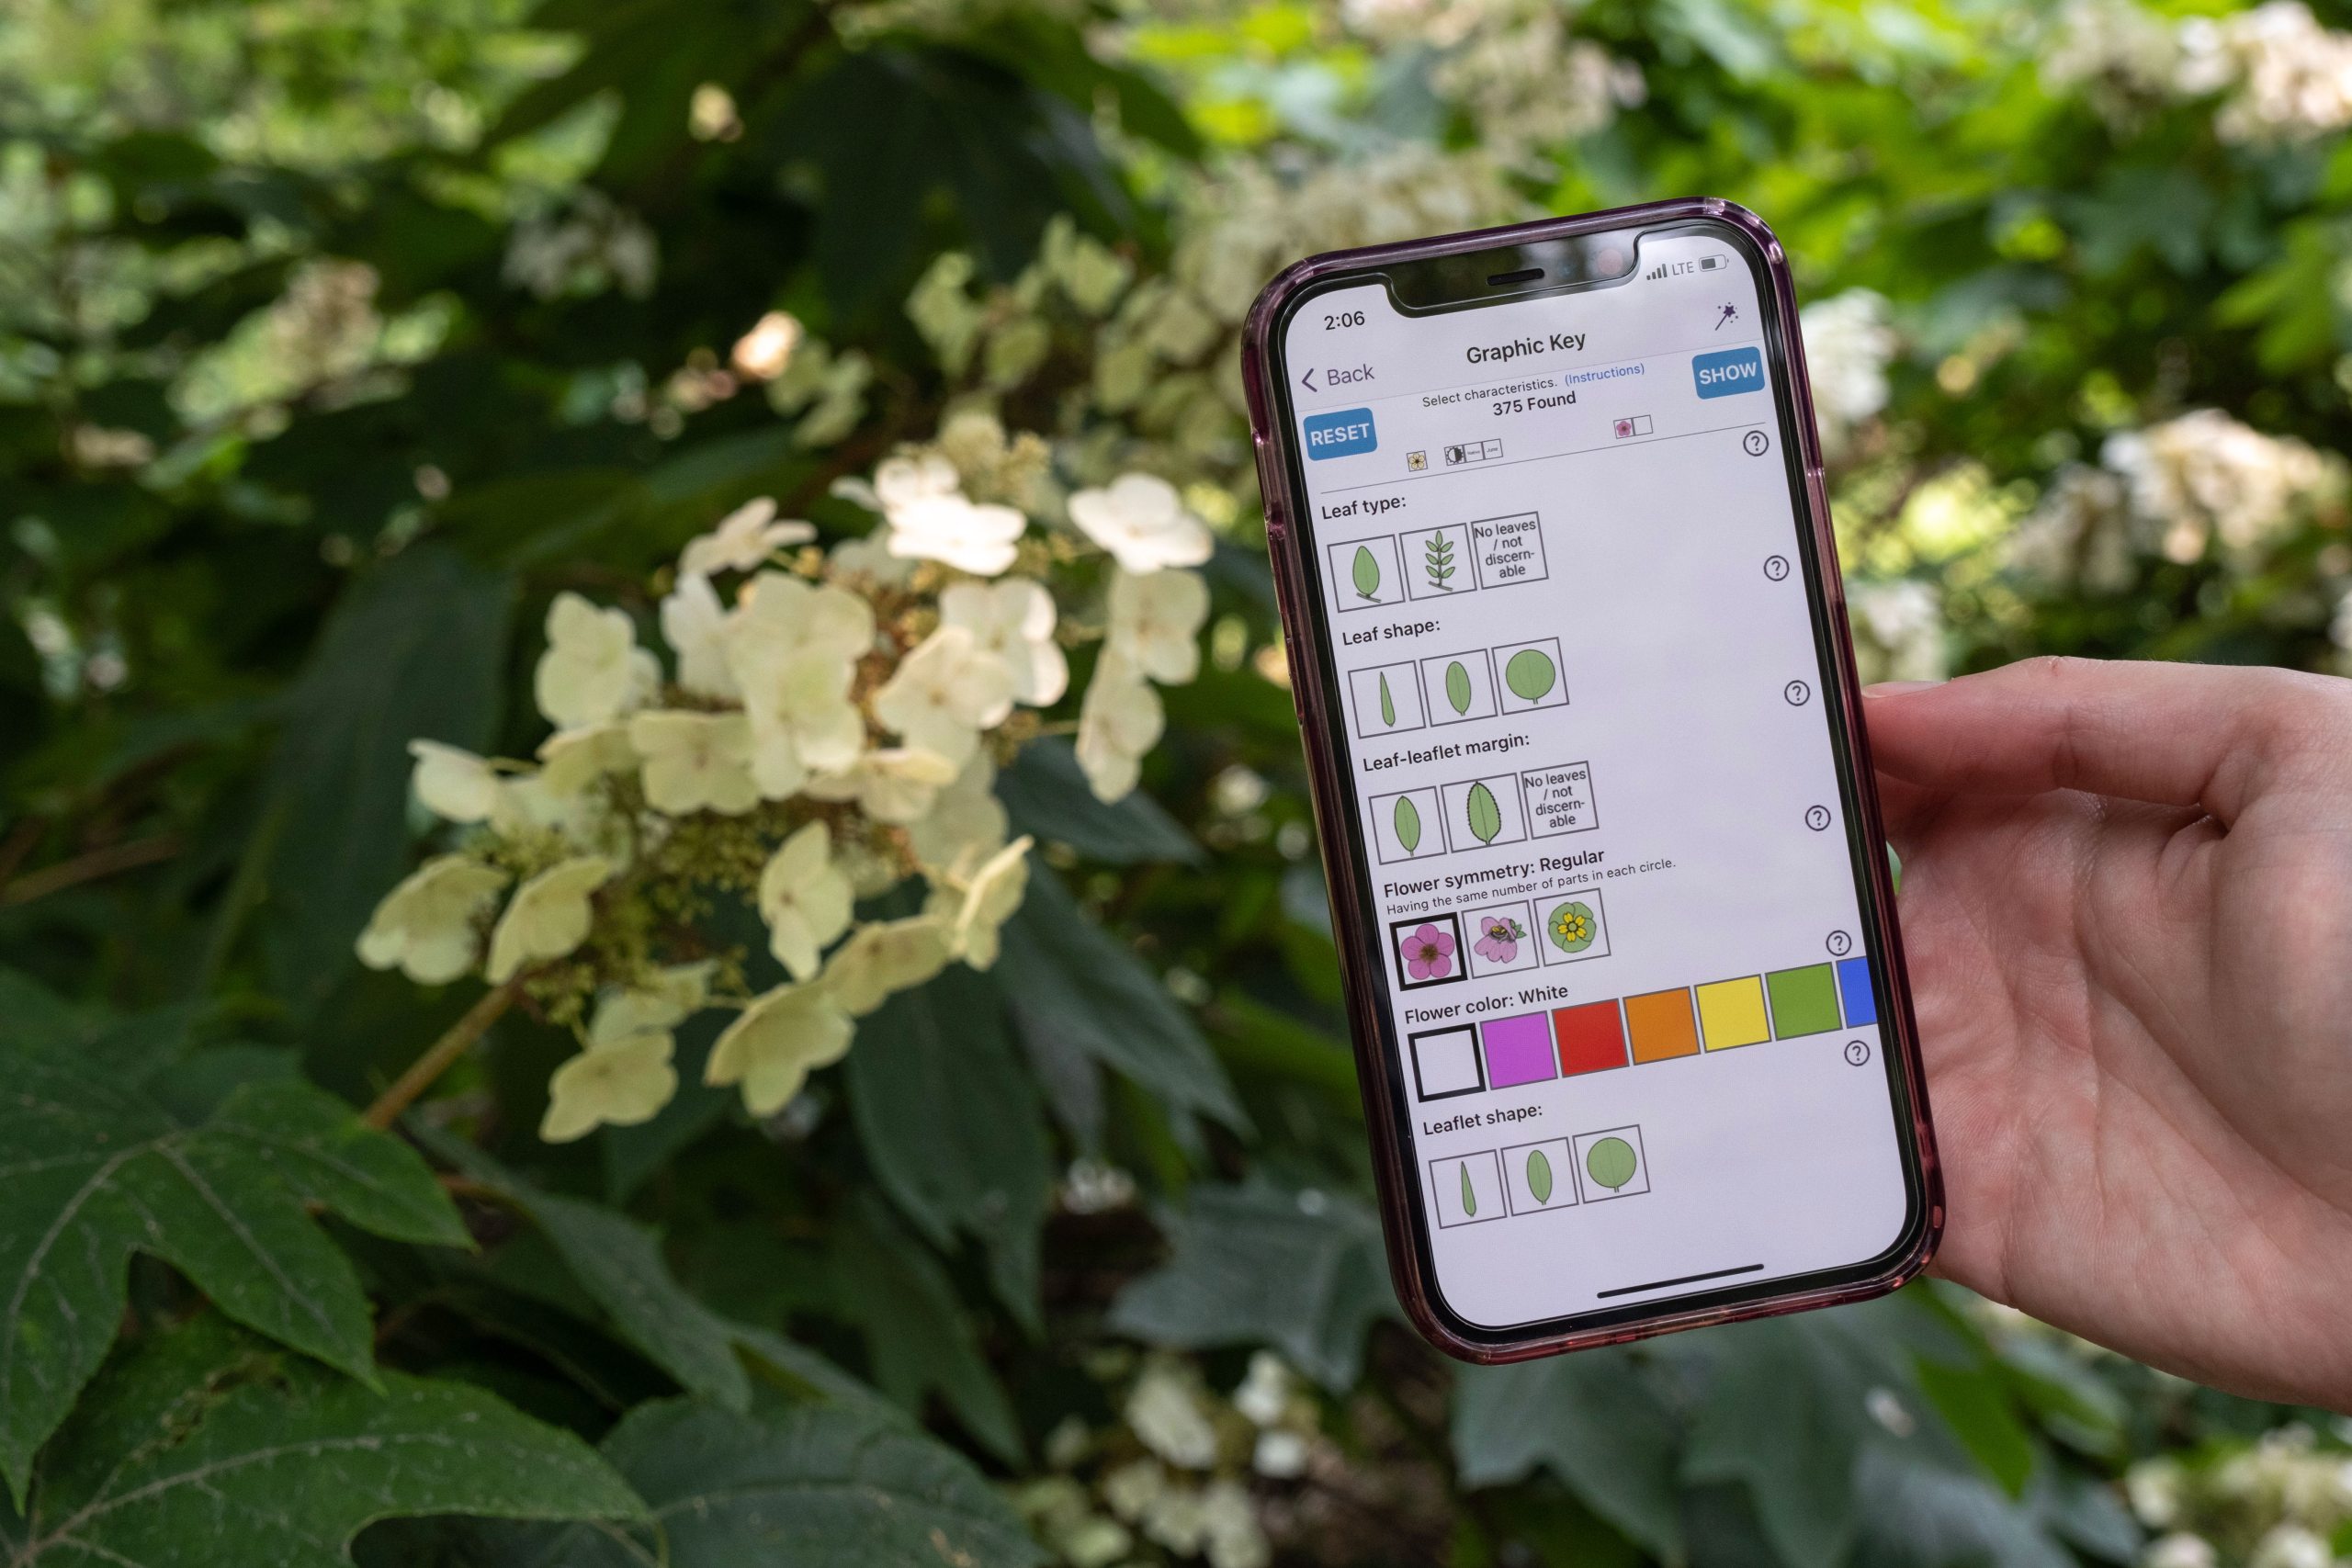 The app's graphic key showing icons that represent various characteristics, such as leaf shape, flower color, size and more.